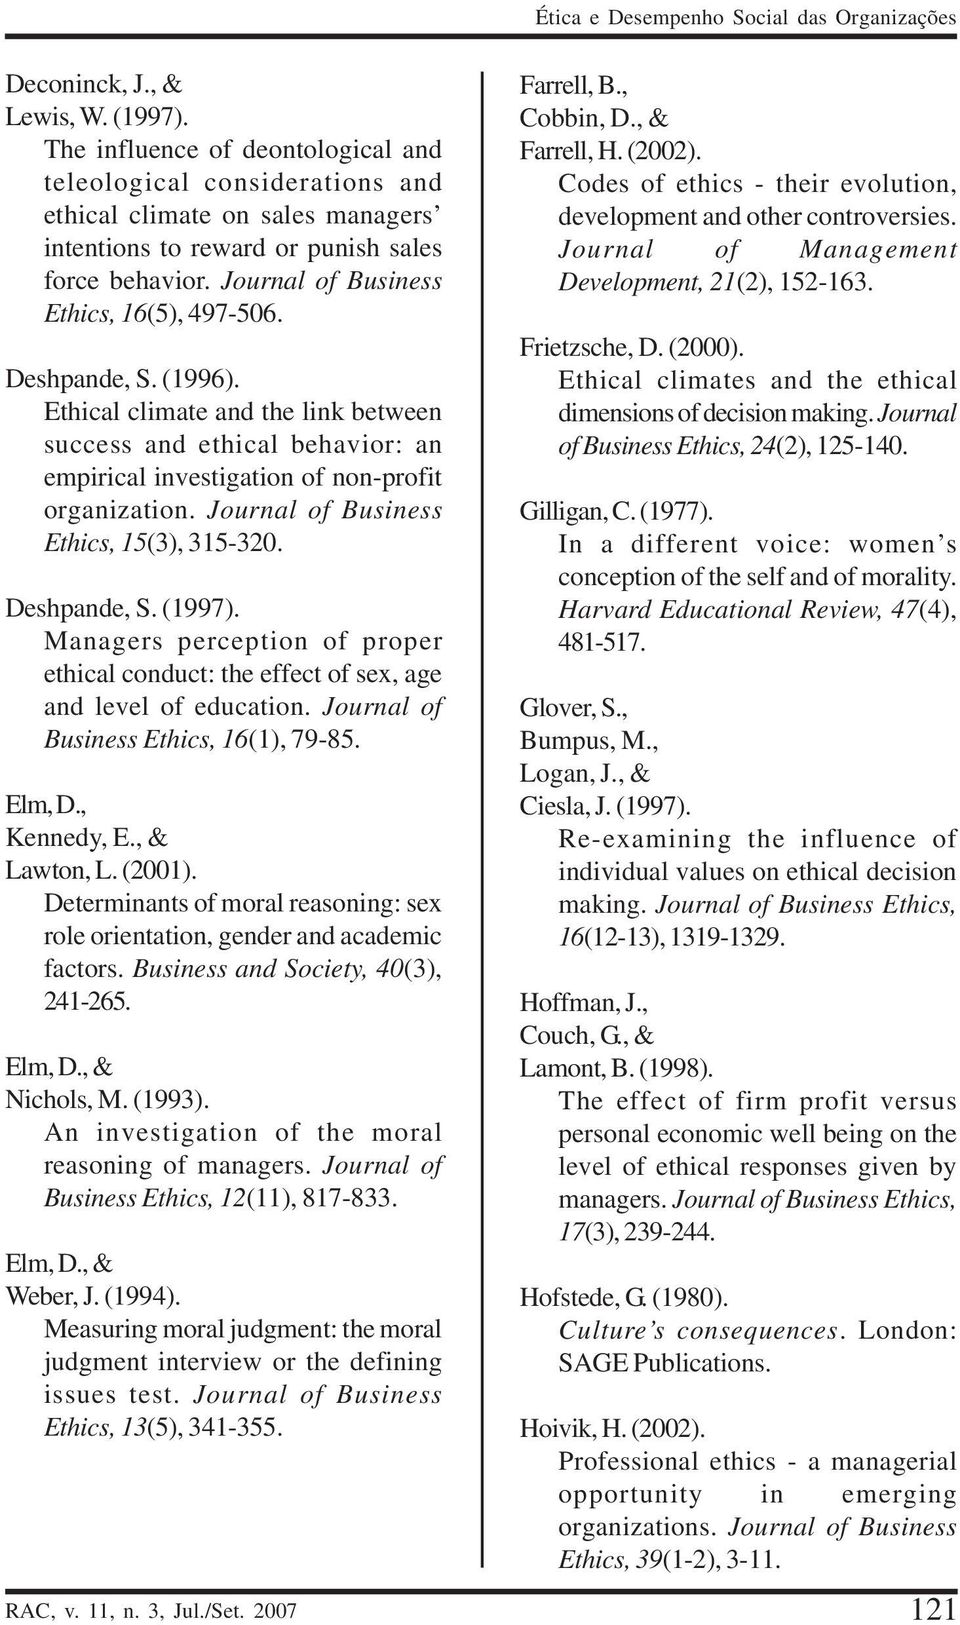 Deshpande, S. (1996). Ethical climate and the link between success and ethical behavior: an empirical investigation of non-profit organization. Journal of Business Ethics, 15(3), 315-320.